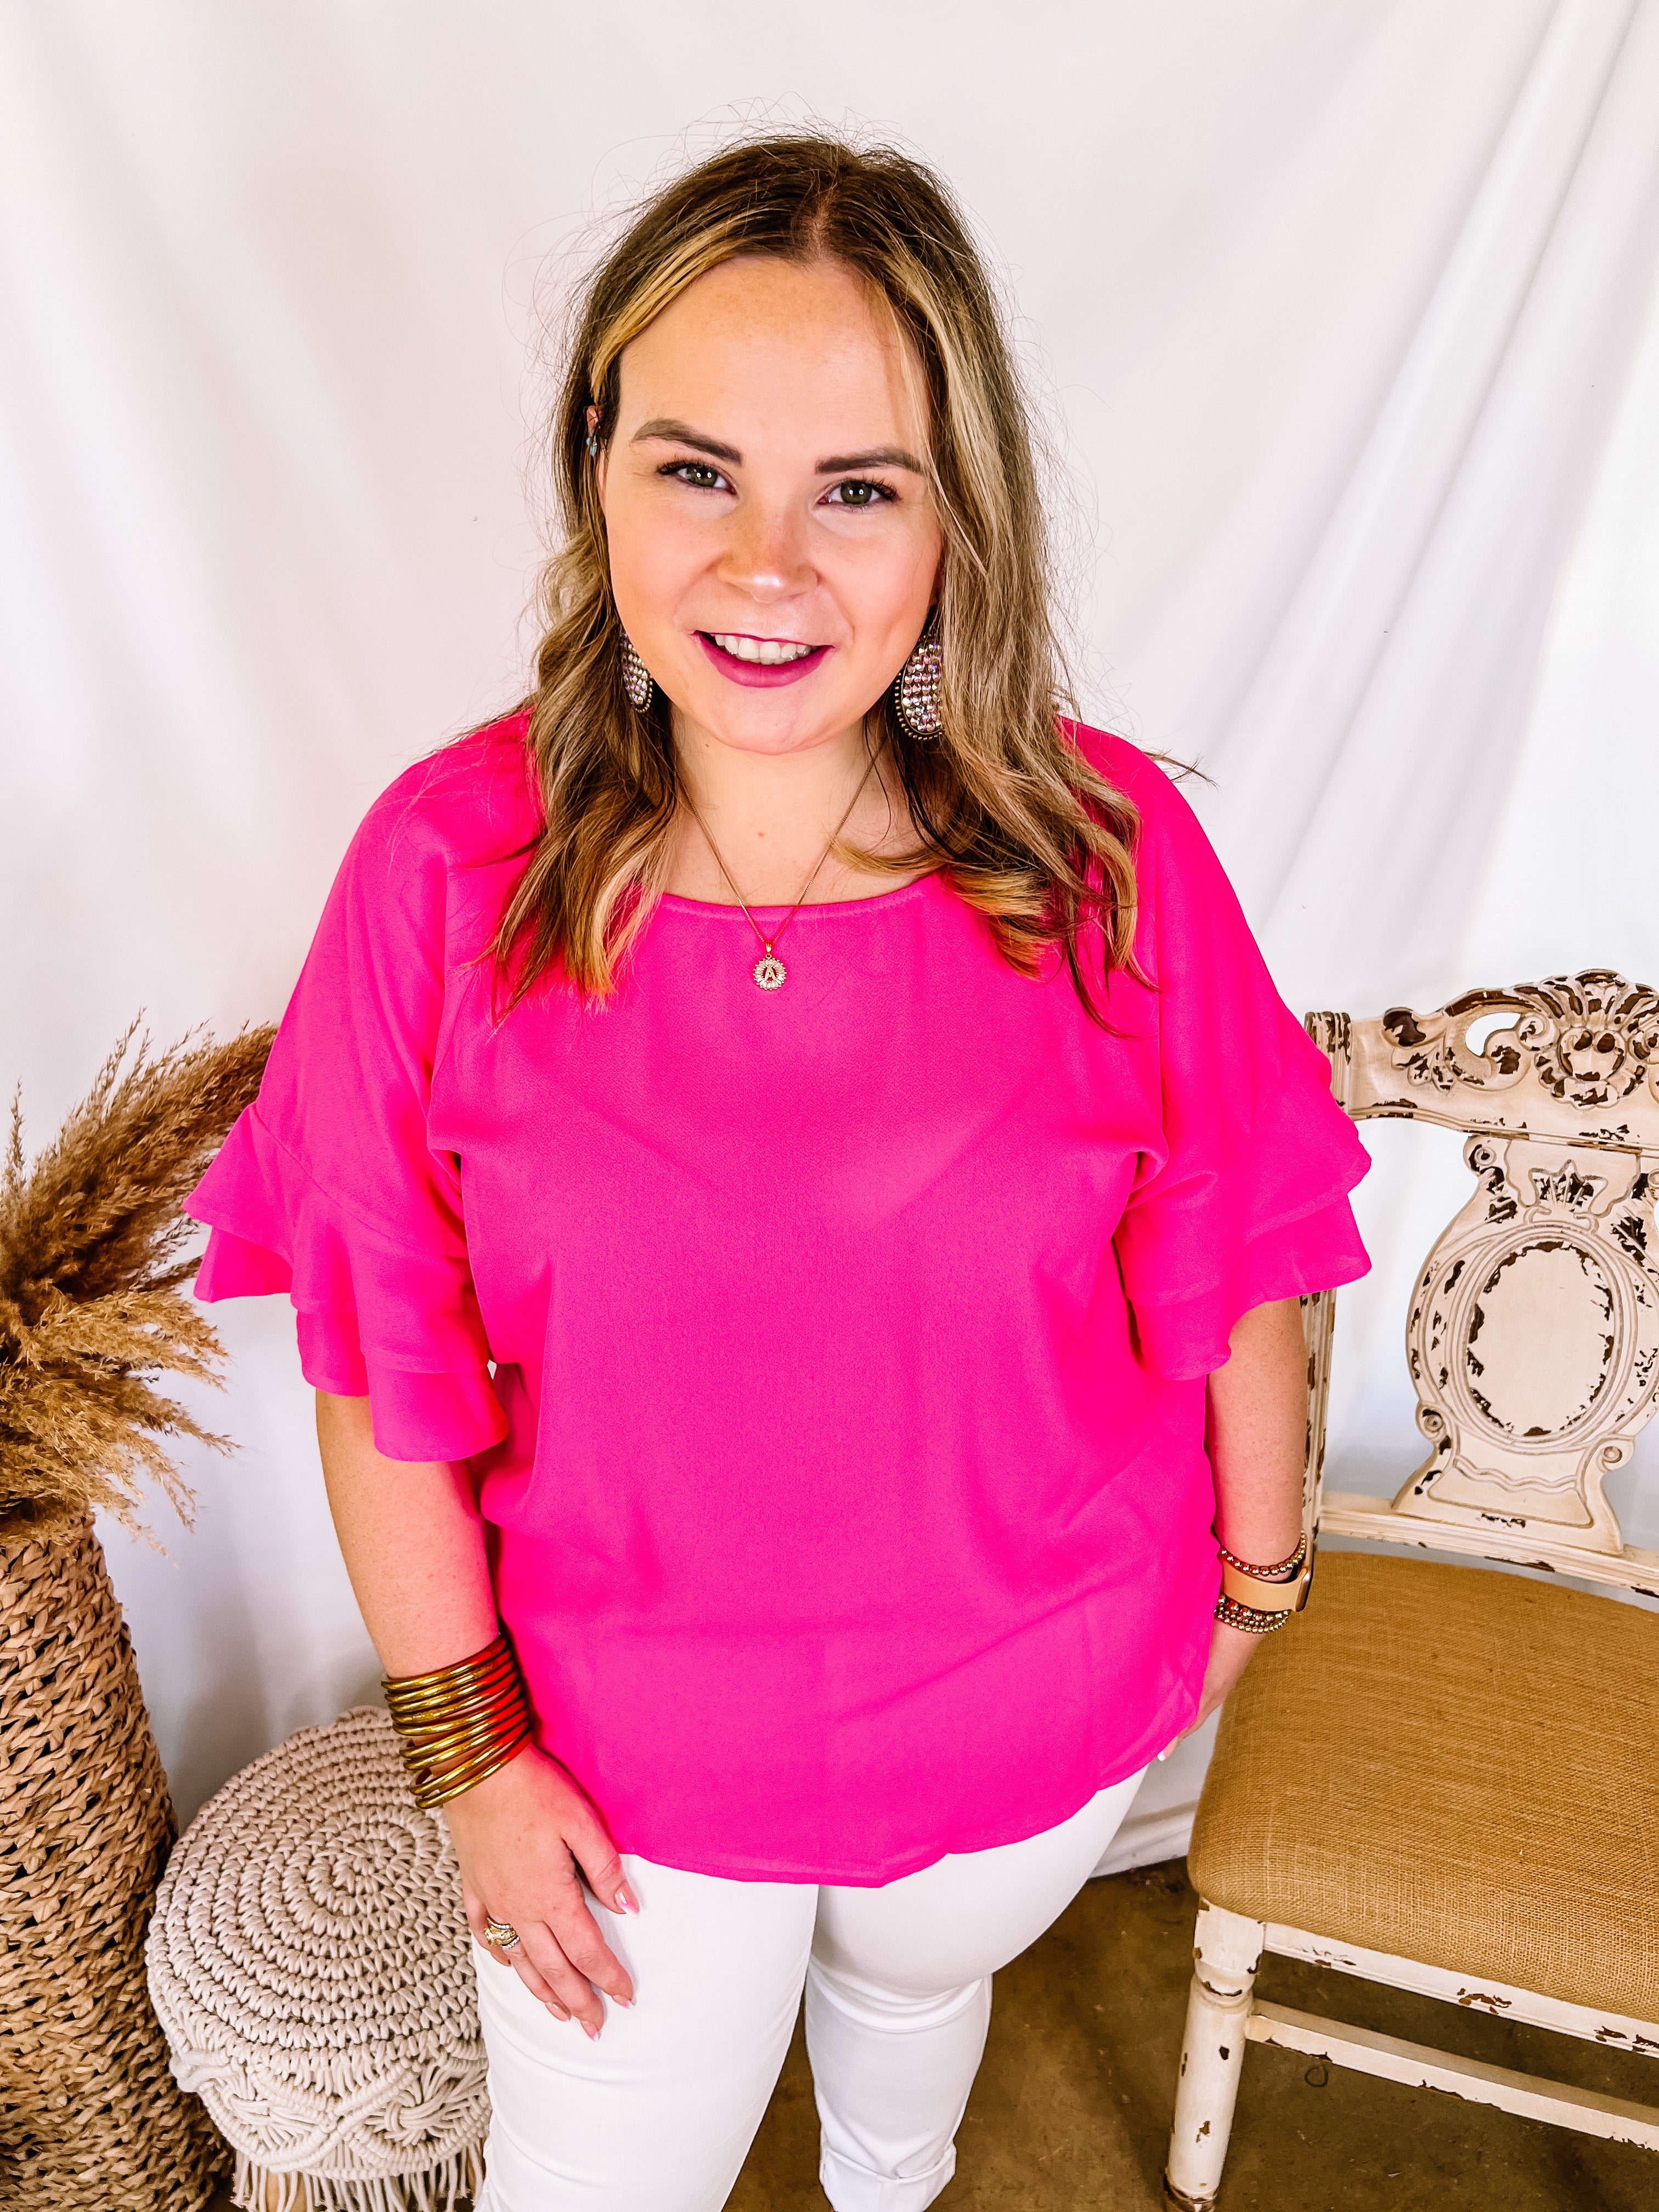 Basic Needs Ruffle Sleeve Top in Hot Pink - Giddy Up Glamour Boutique